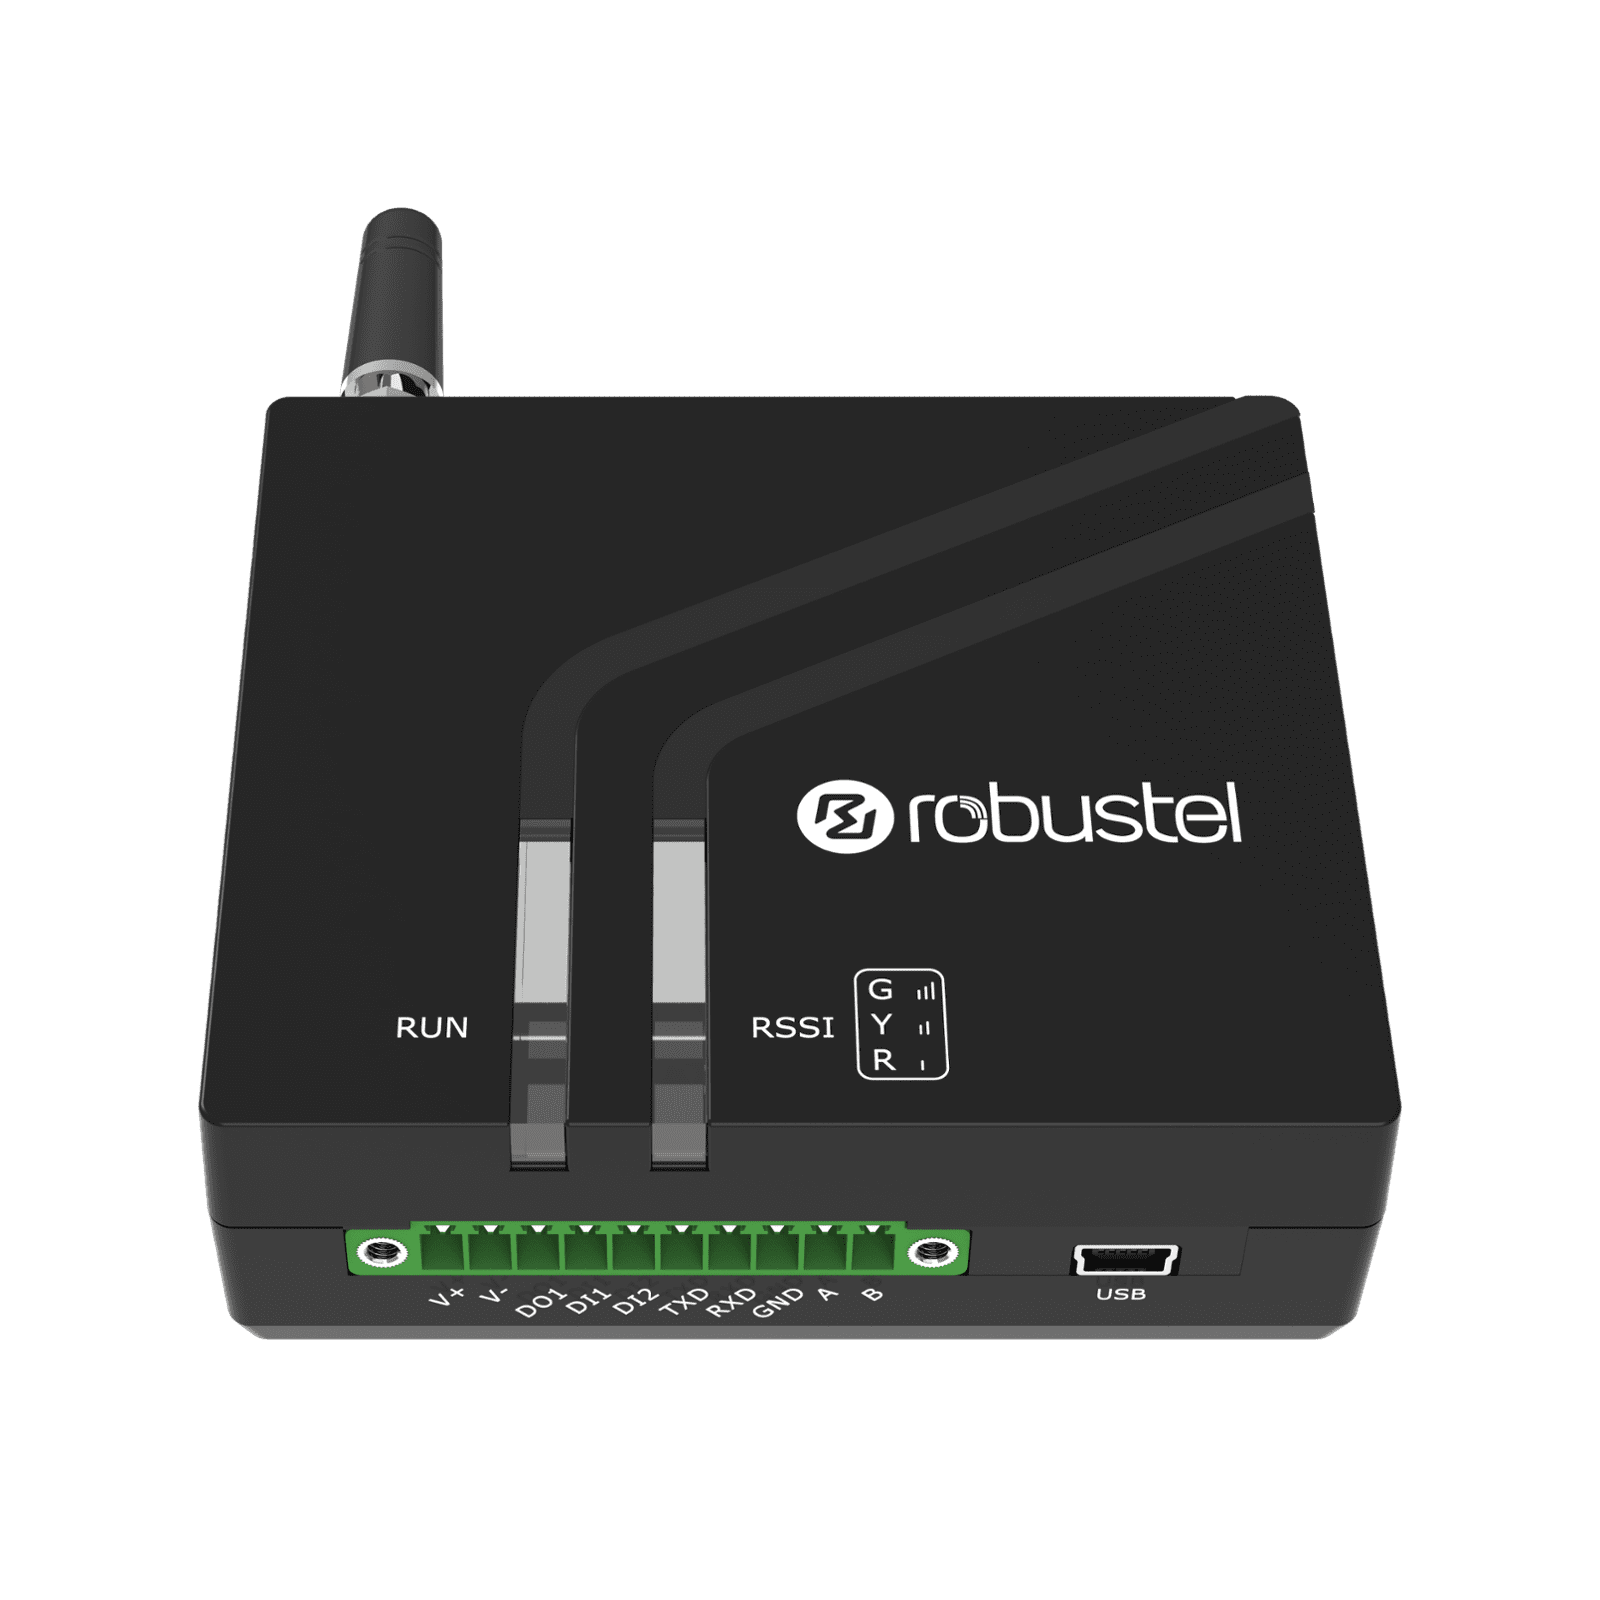 Robustel M1200 router